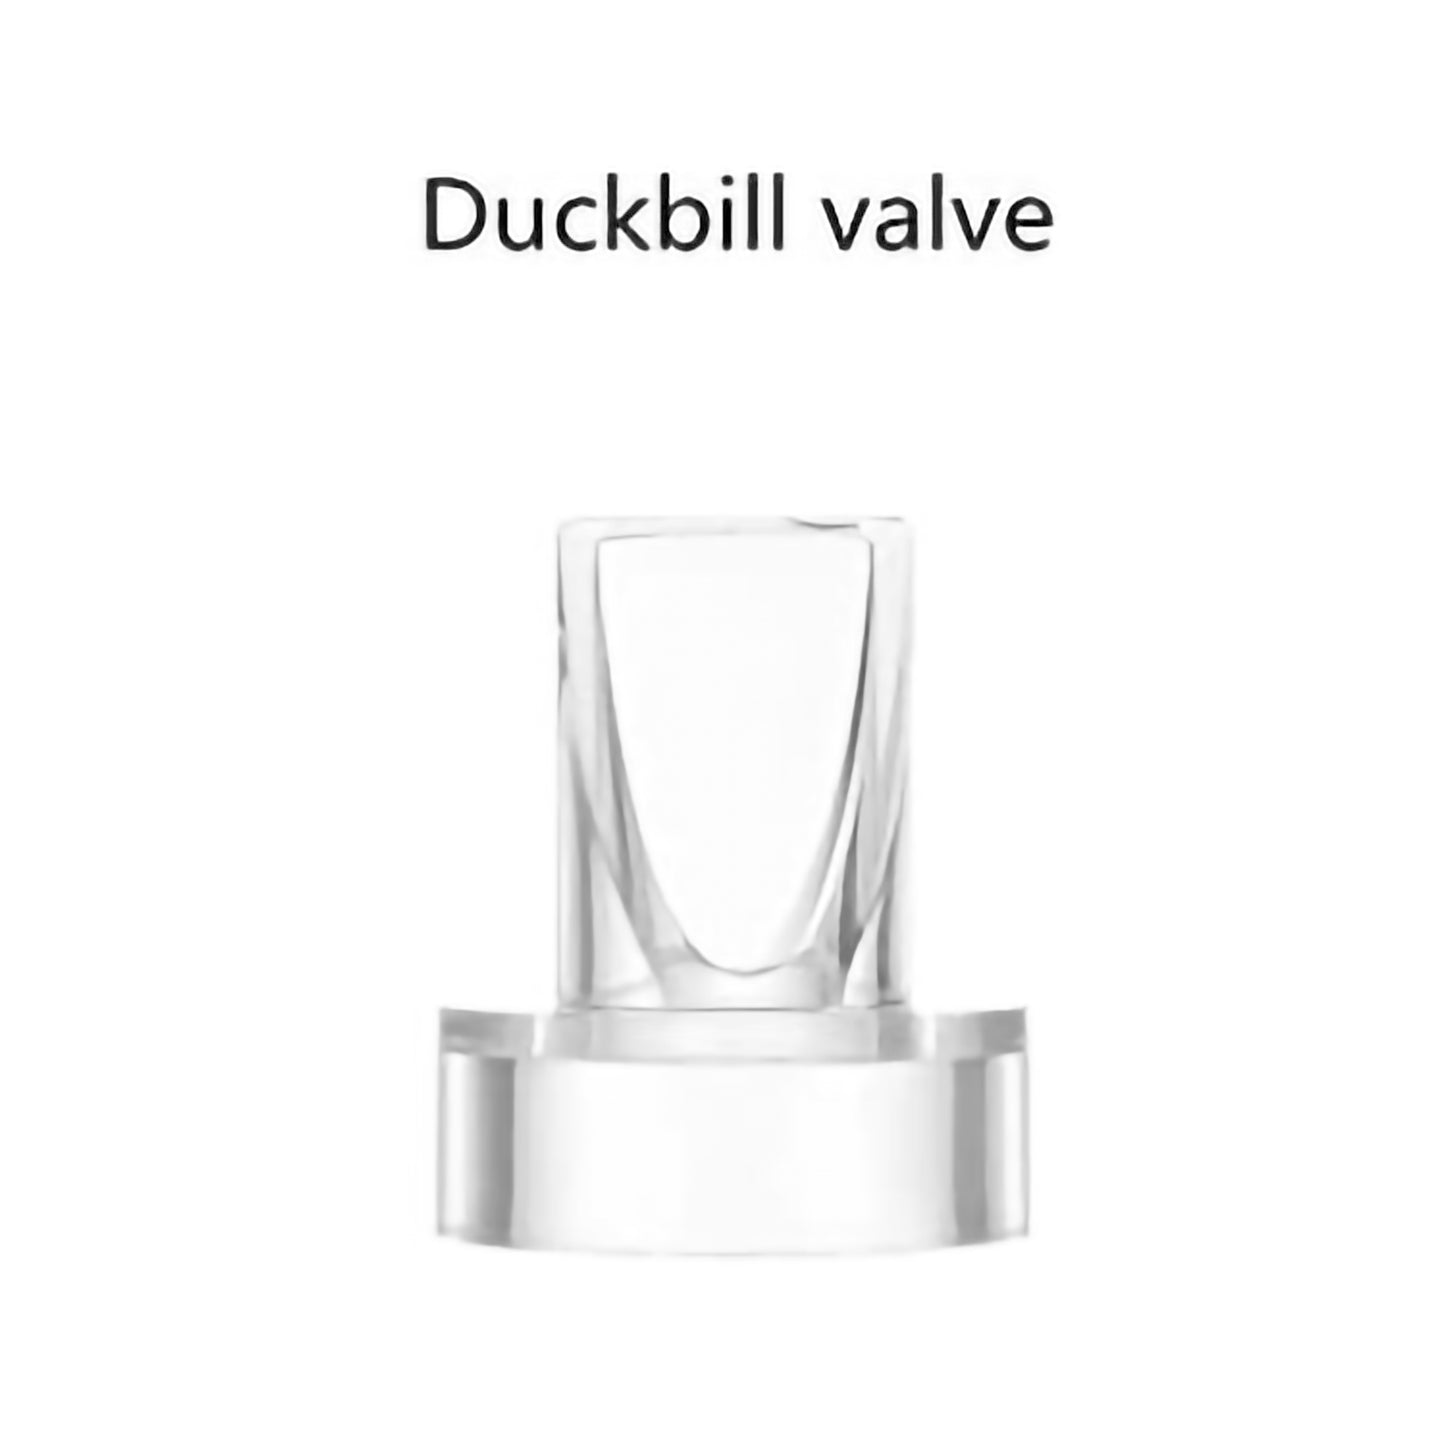 Mamomy Valves & Silicone Diaphragm for S9/S10/S12/S4DW,Wearable Breast Pump Universal Duckbill Valve and Silicone Diaphragm Accessories